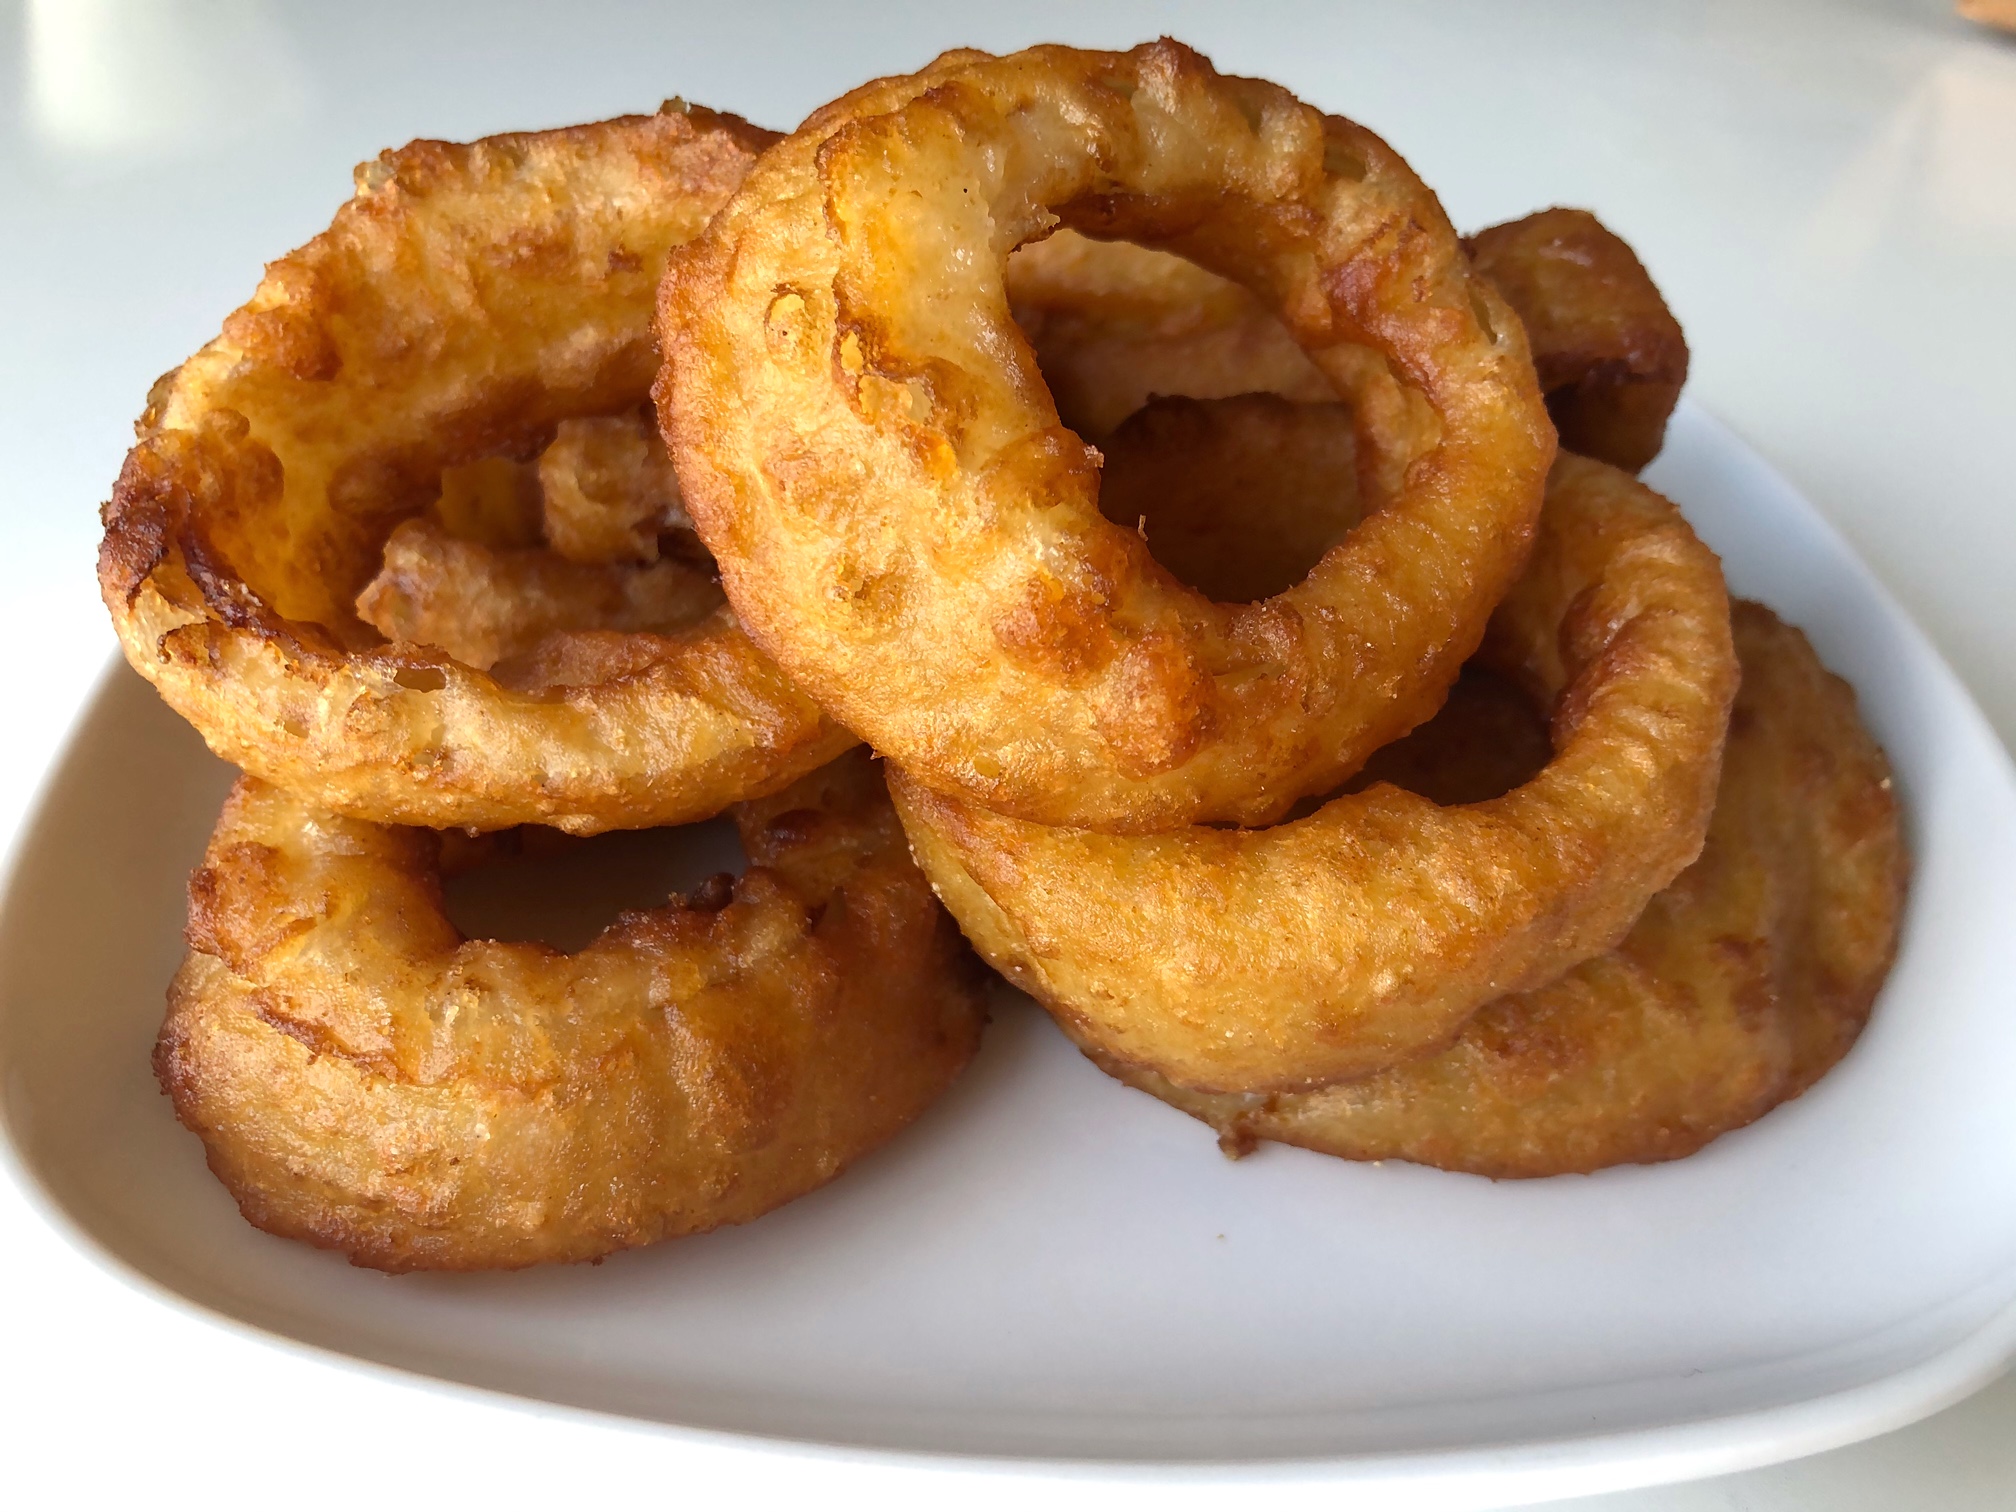 On a white plate, there are several golden brown onion rings. Photo by Alyssa Buckley.